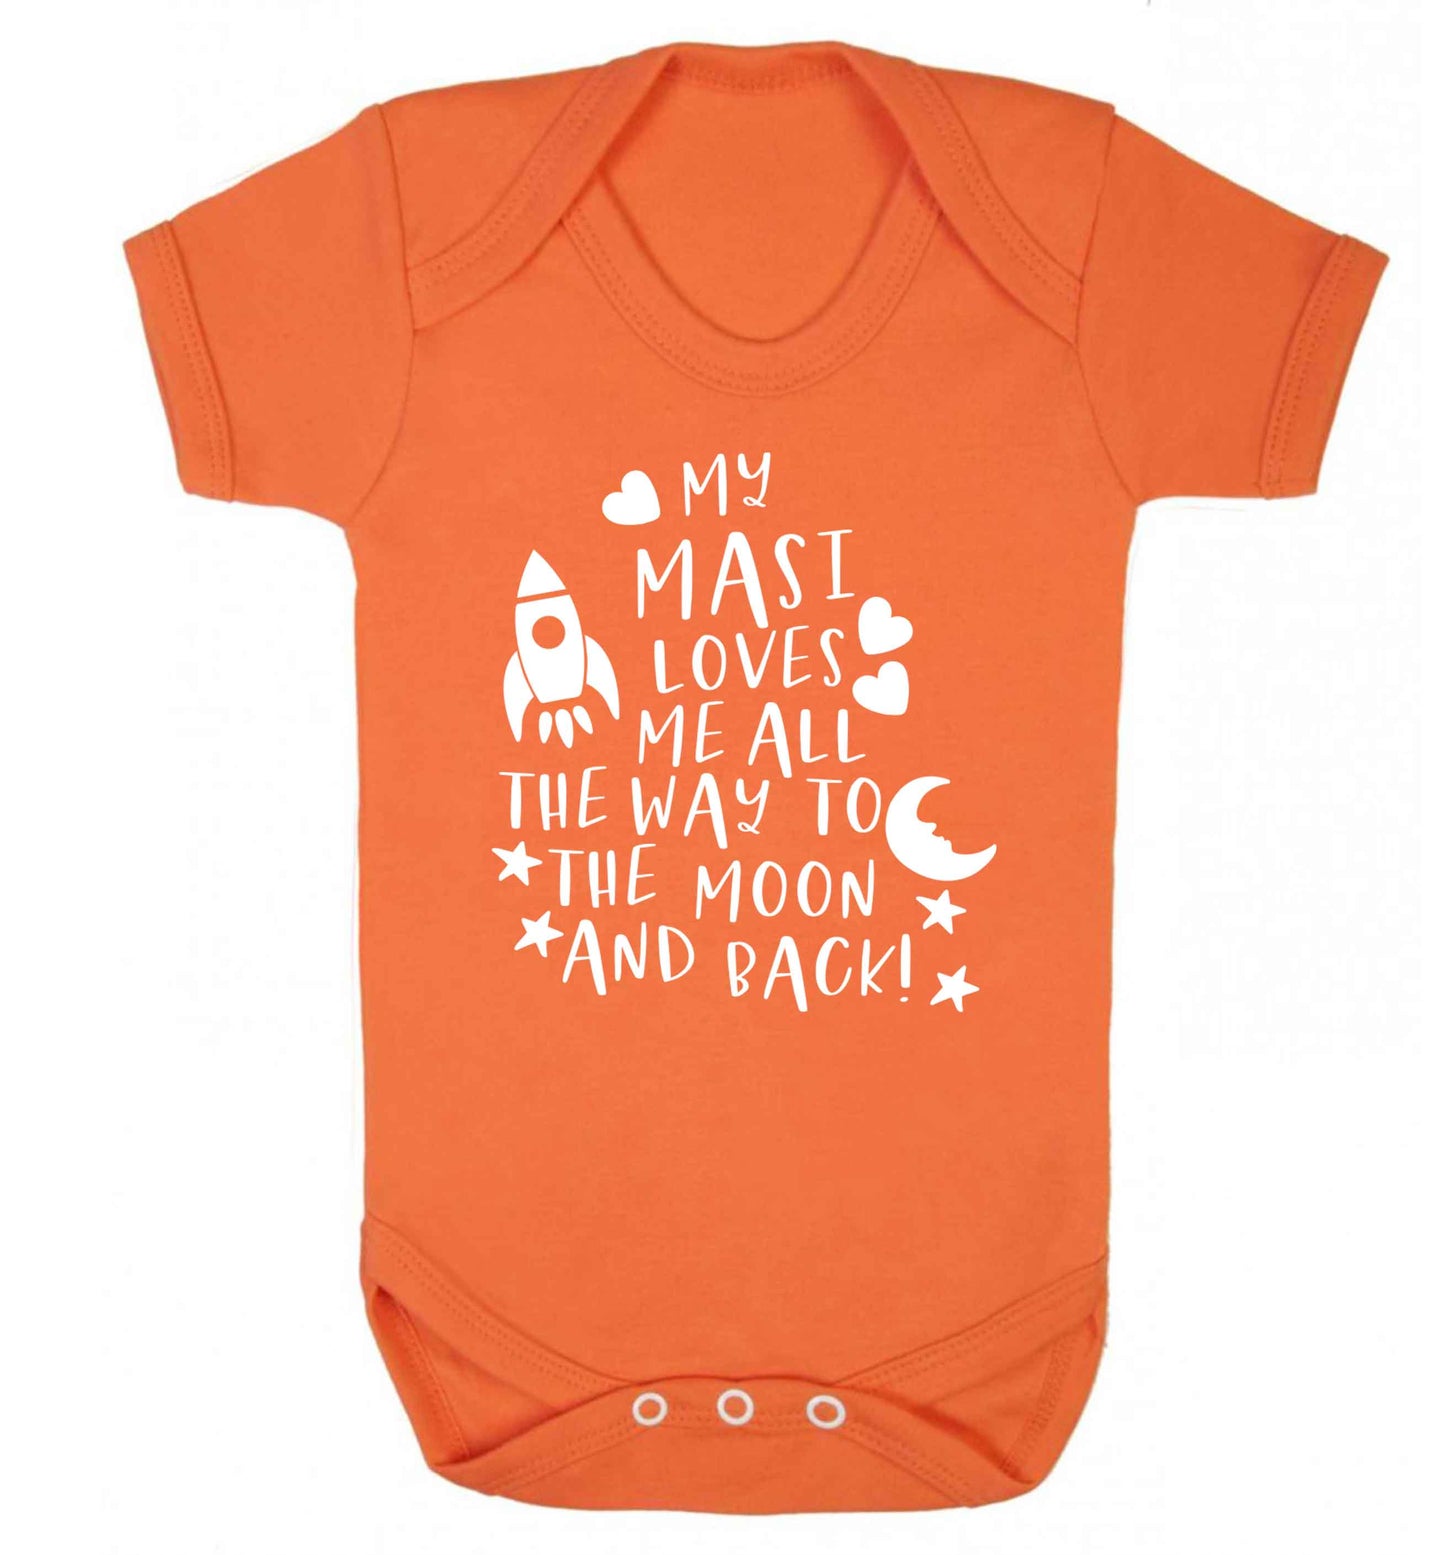 My masi loves me all the way to the moon and back Baby Vest orange 18-24 months